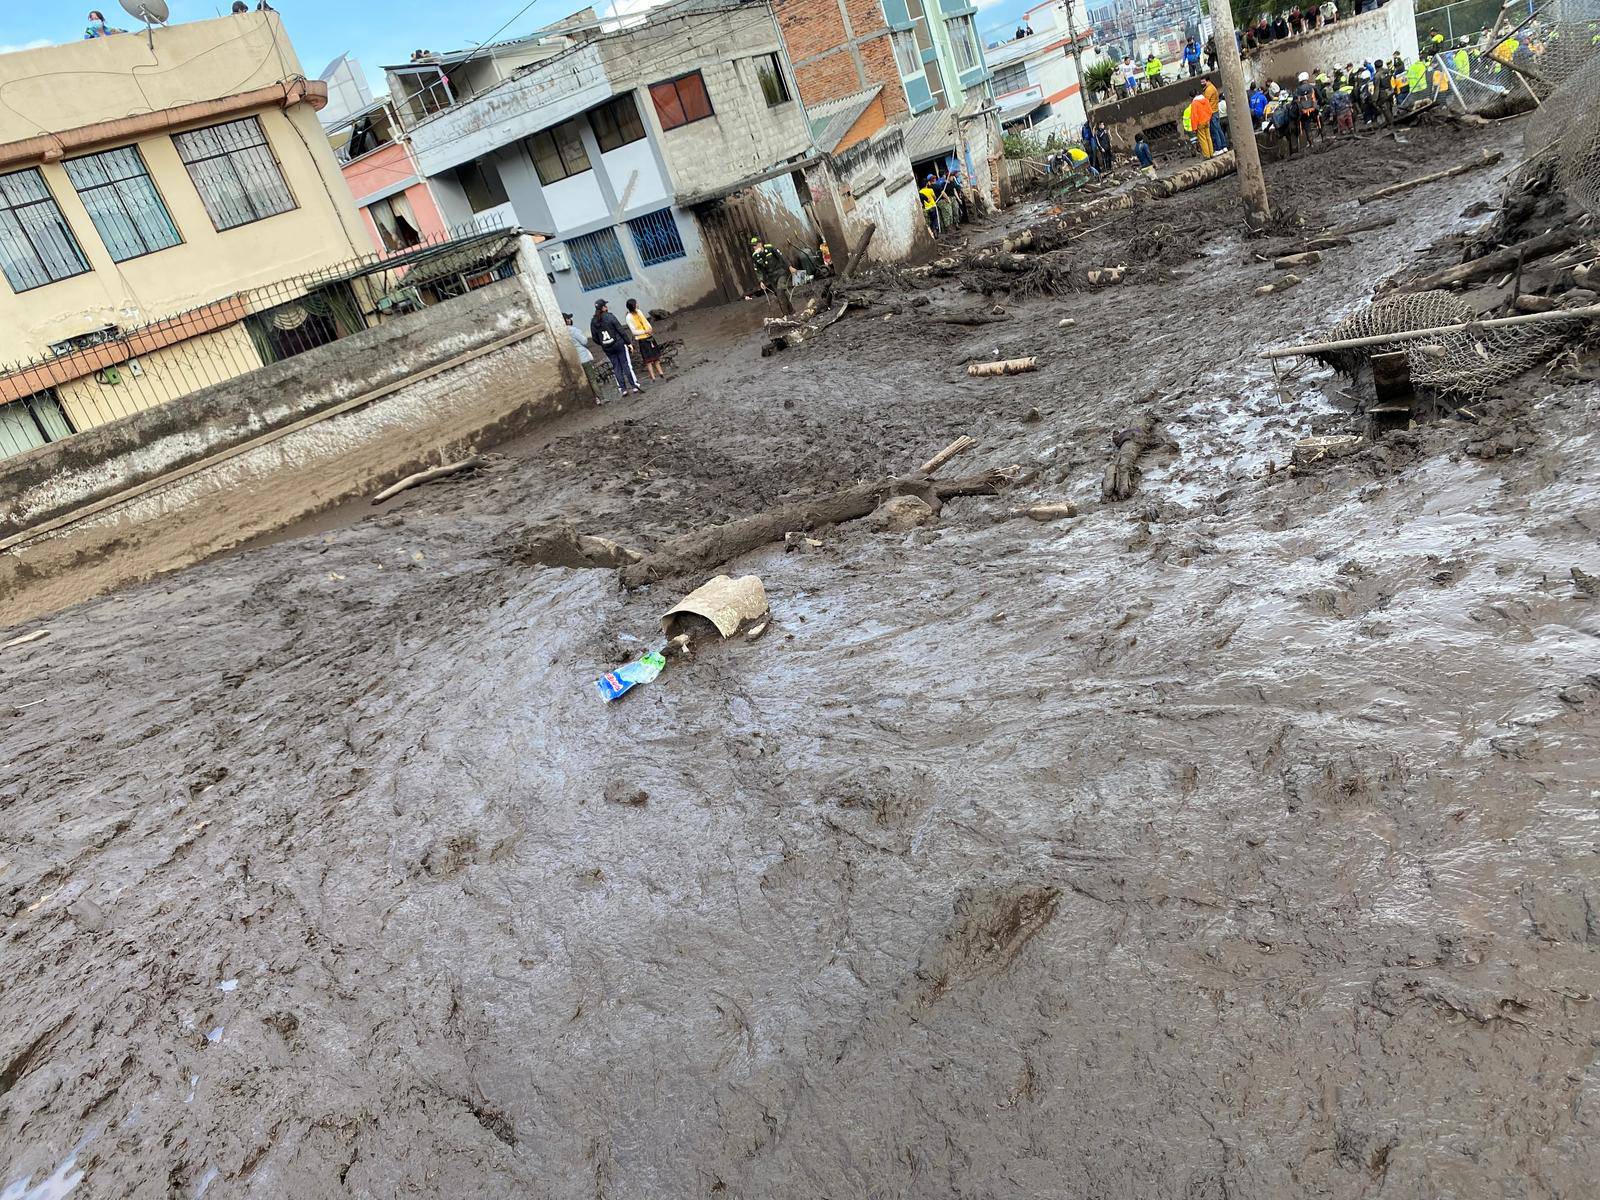 Flooding site and aftermath at La Gasca neighborhood in Quito, Ecuador